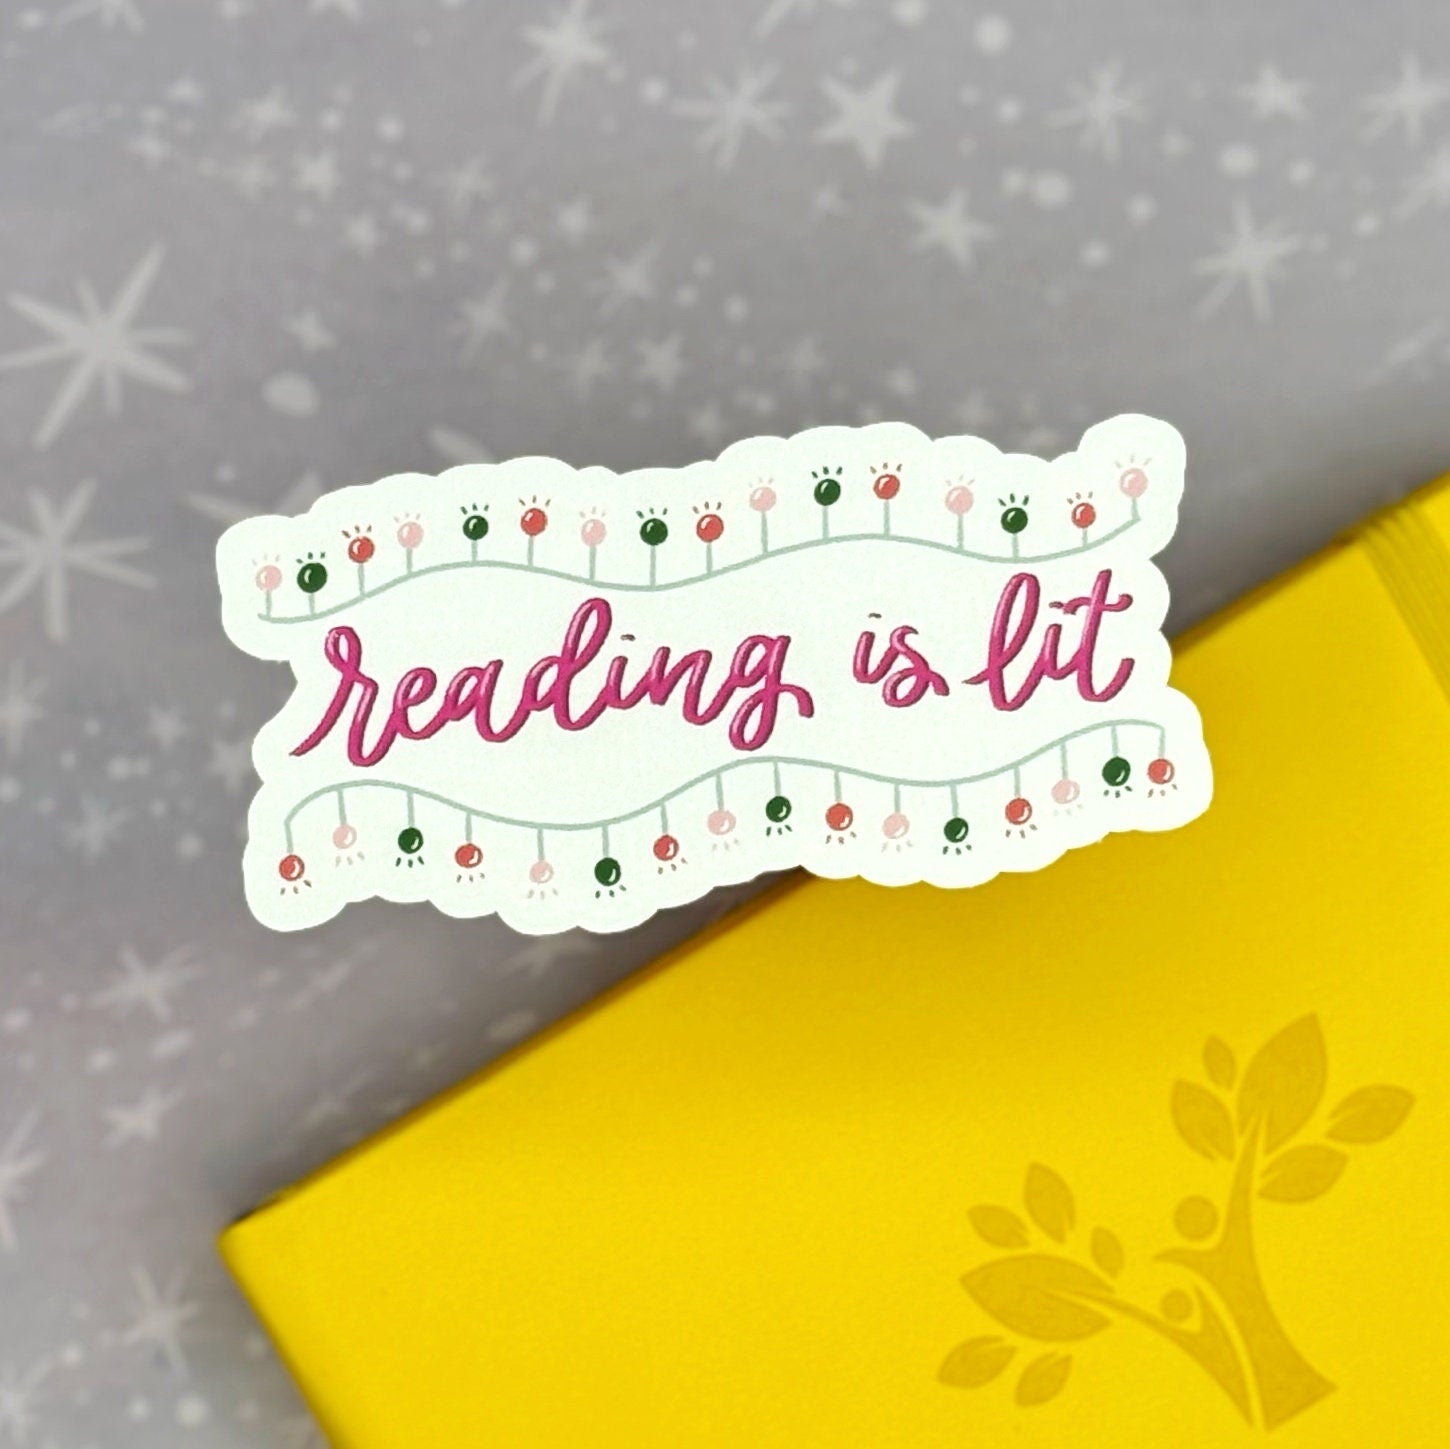 Reading is Lit Holiday Matte Sticker, Book Lover Sticker, Bookish Decal, Stocking Stuffer for Reading Lover, Holiday Sticker for Bookish BFF